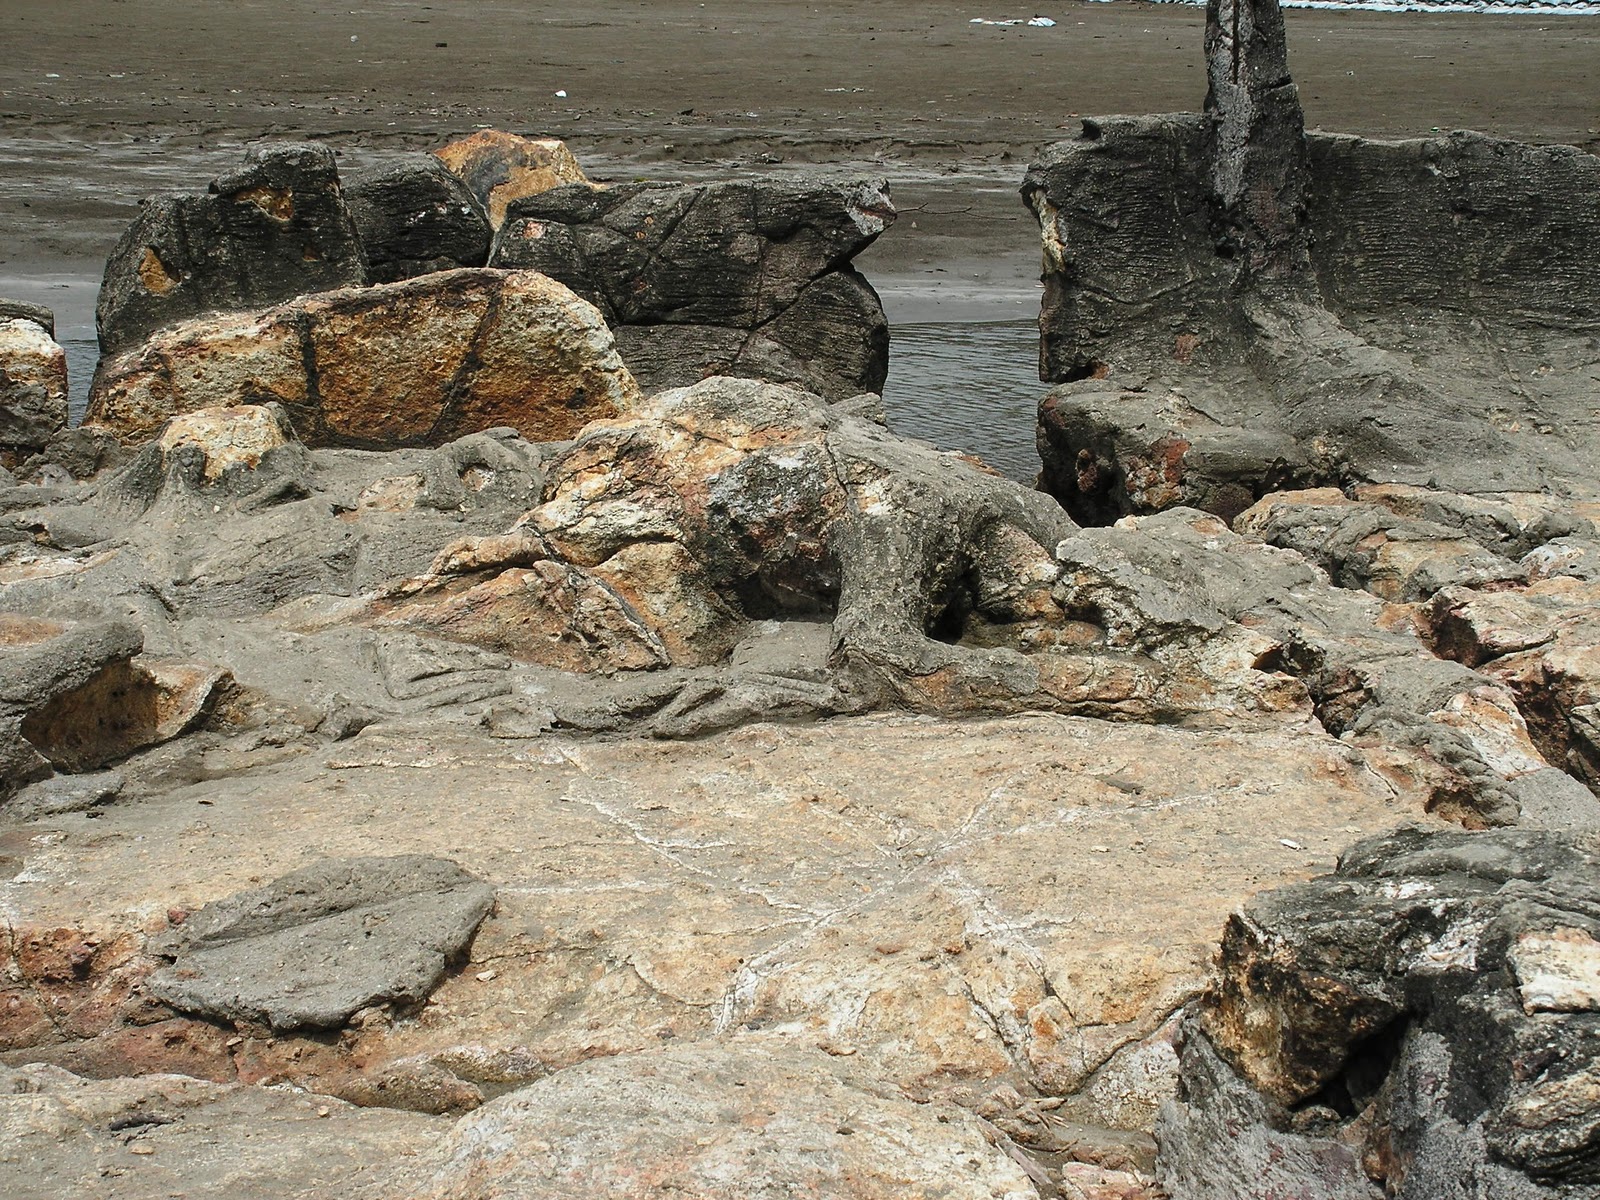 A pile of rocks on a beach that is said to be the remains of a man named Malin Kundang who was turned to stone as punishment for his disobedience to his mother.